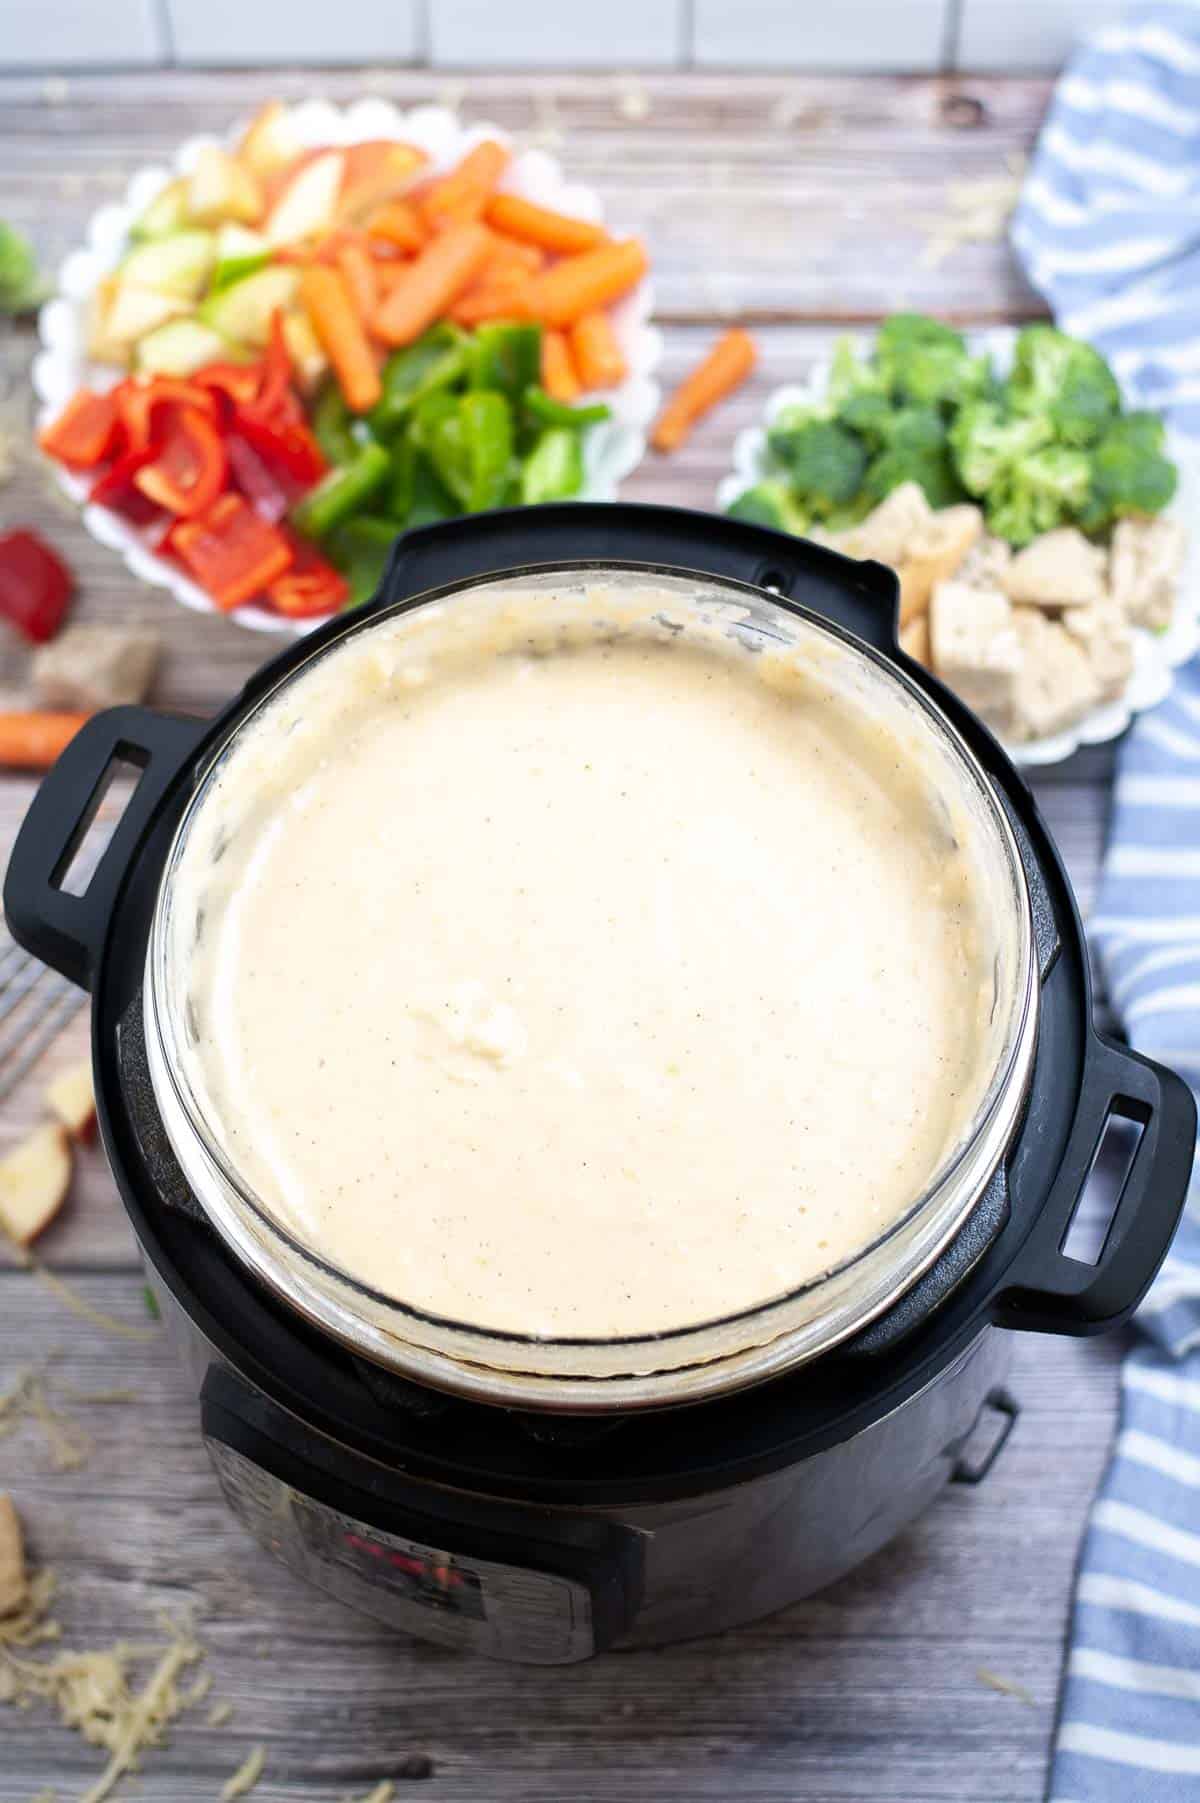 A Instant Pot filled with cheese fondue with a tray of raw veggies and bread cubes in the background.